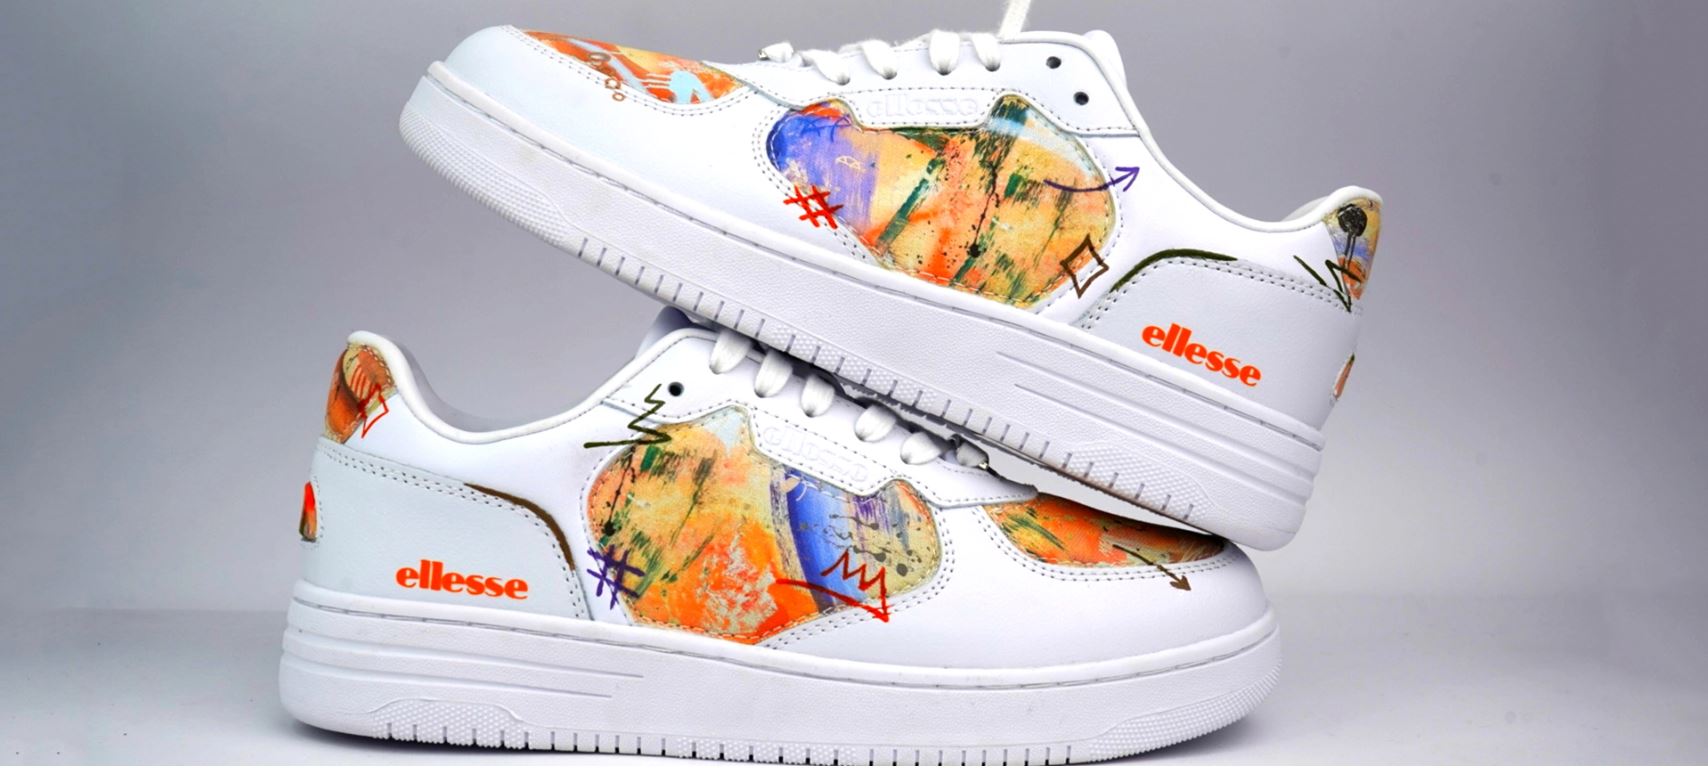 ellesse UK x Google launch limited-edition nameless trainers